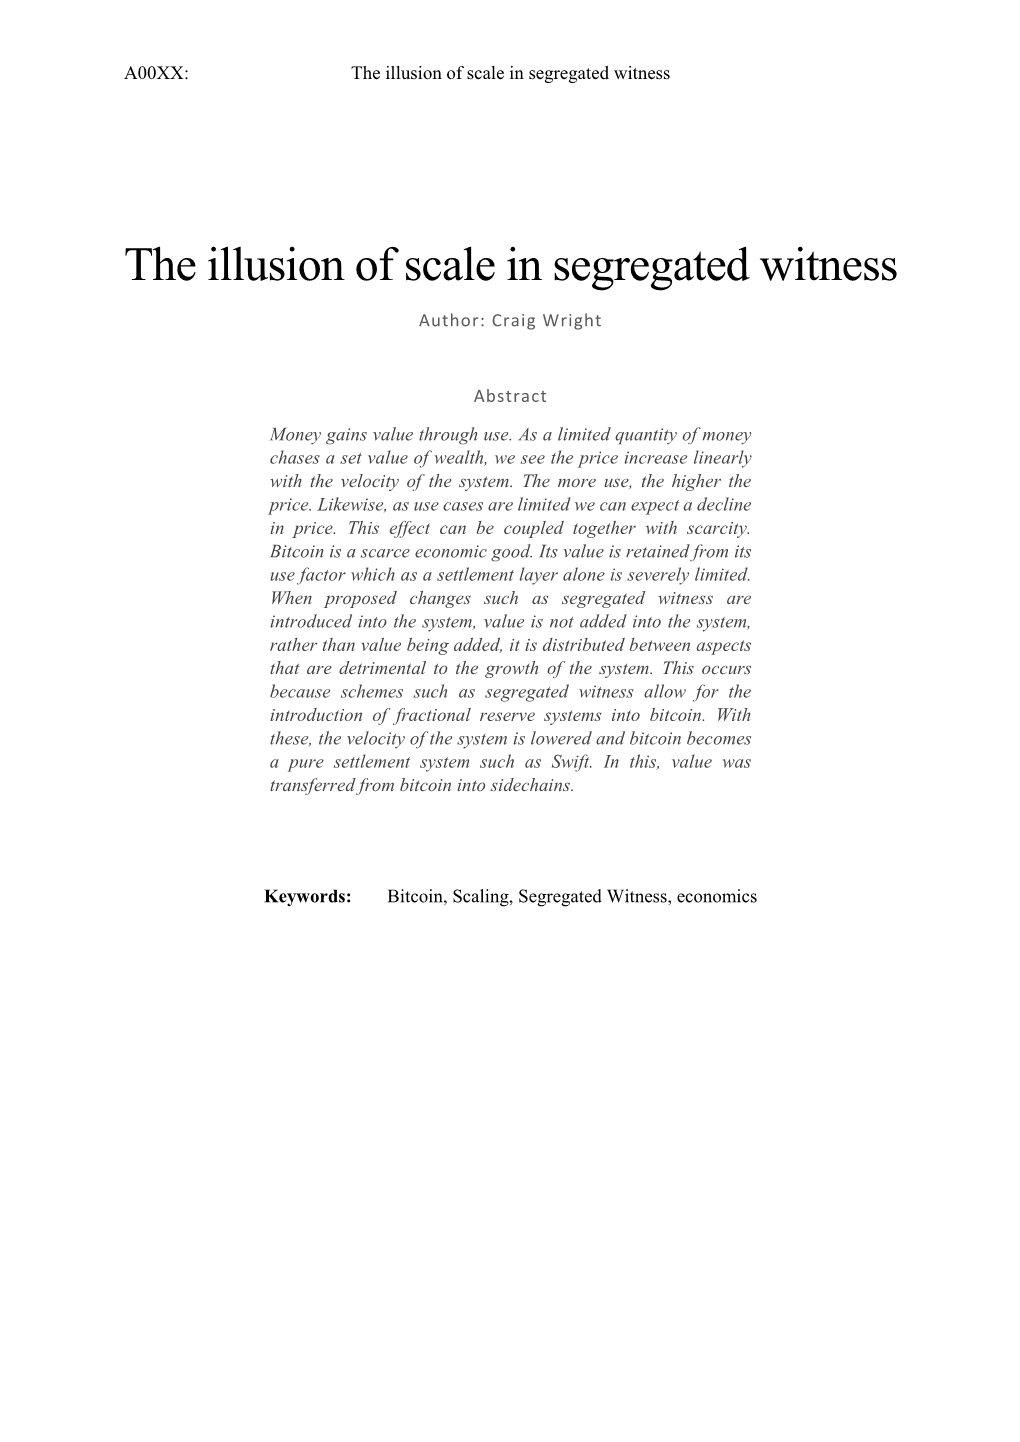 The Illusion of Scale in Segregated Witness